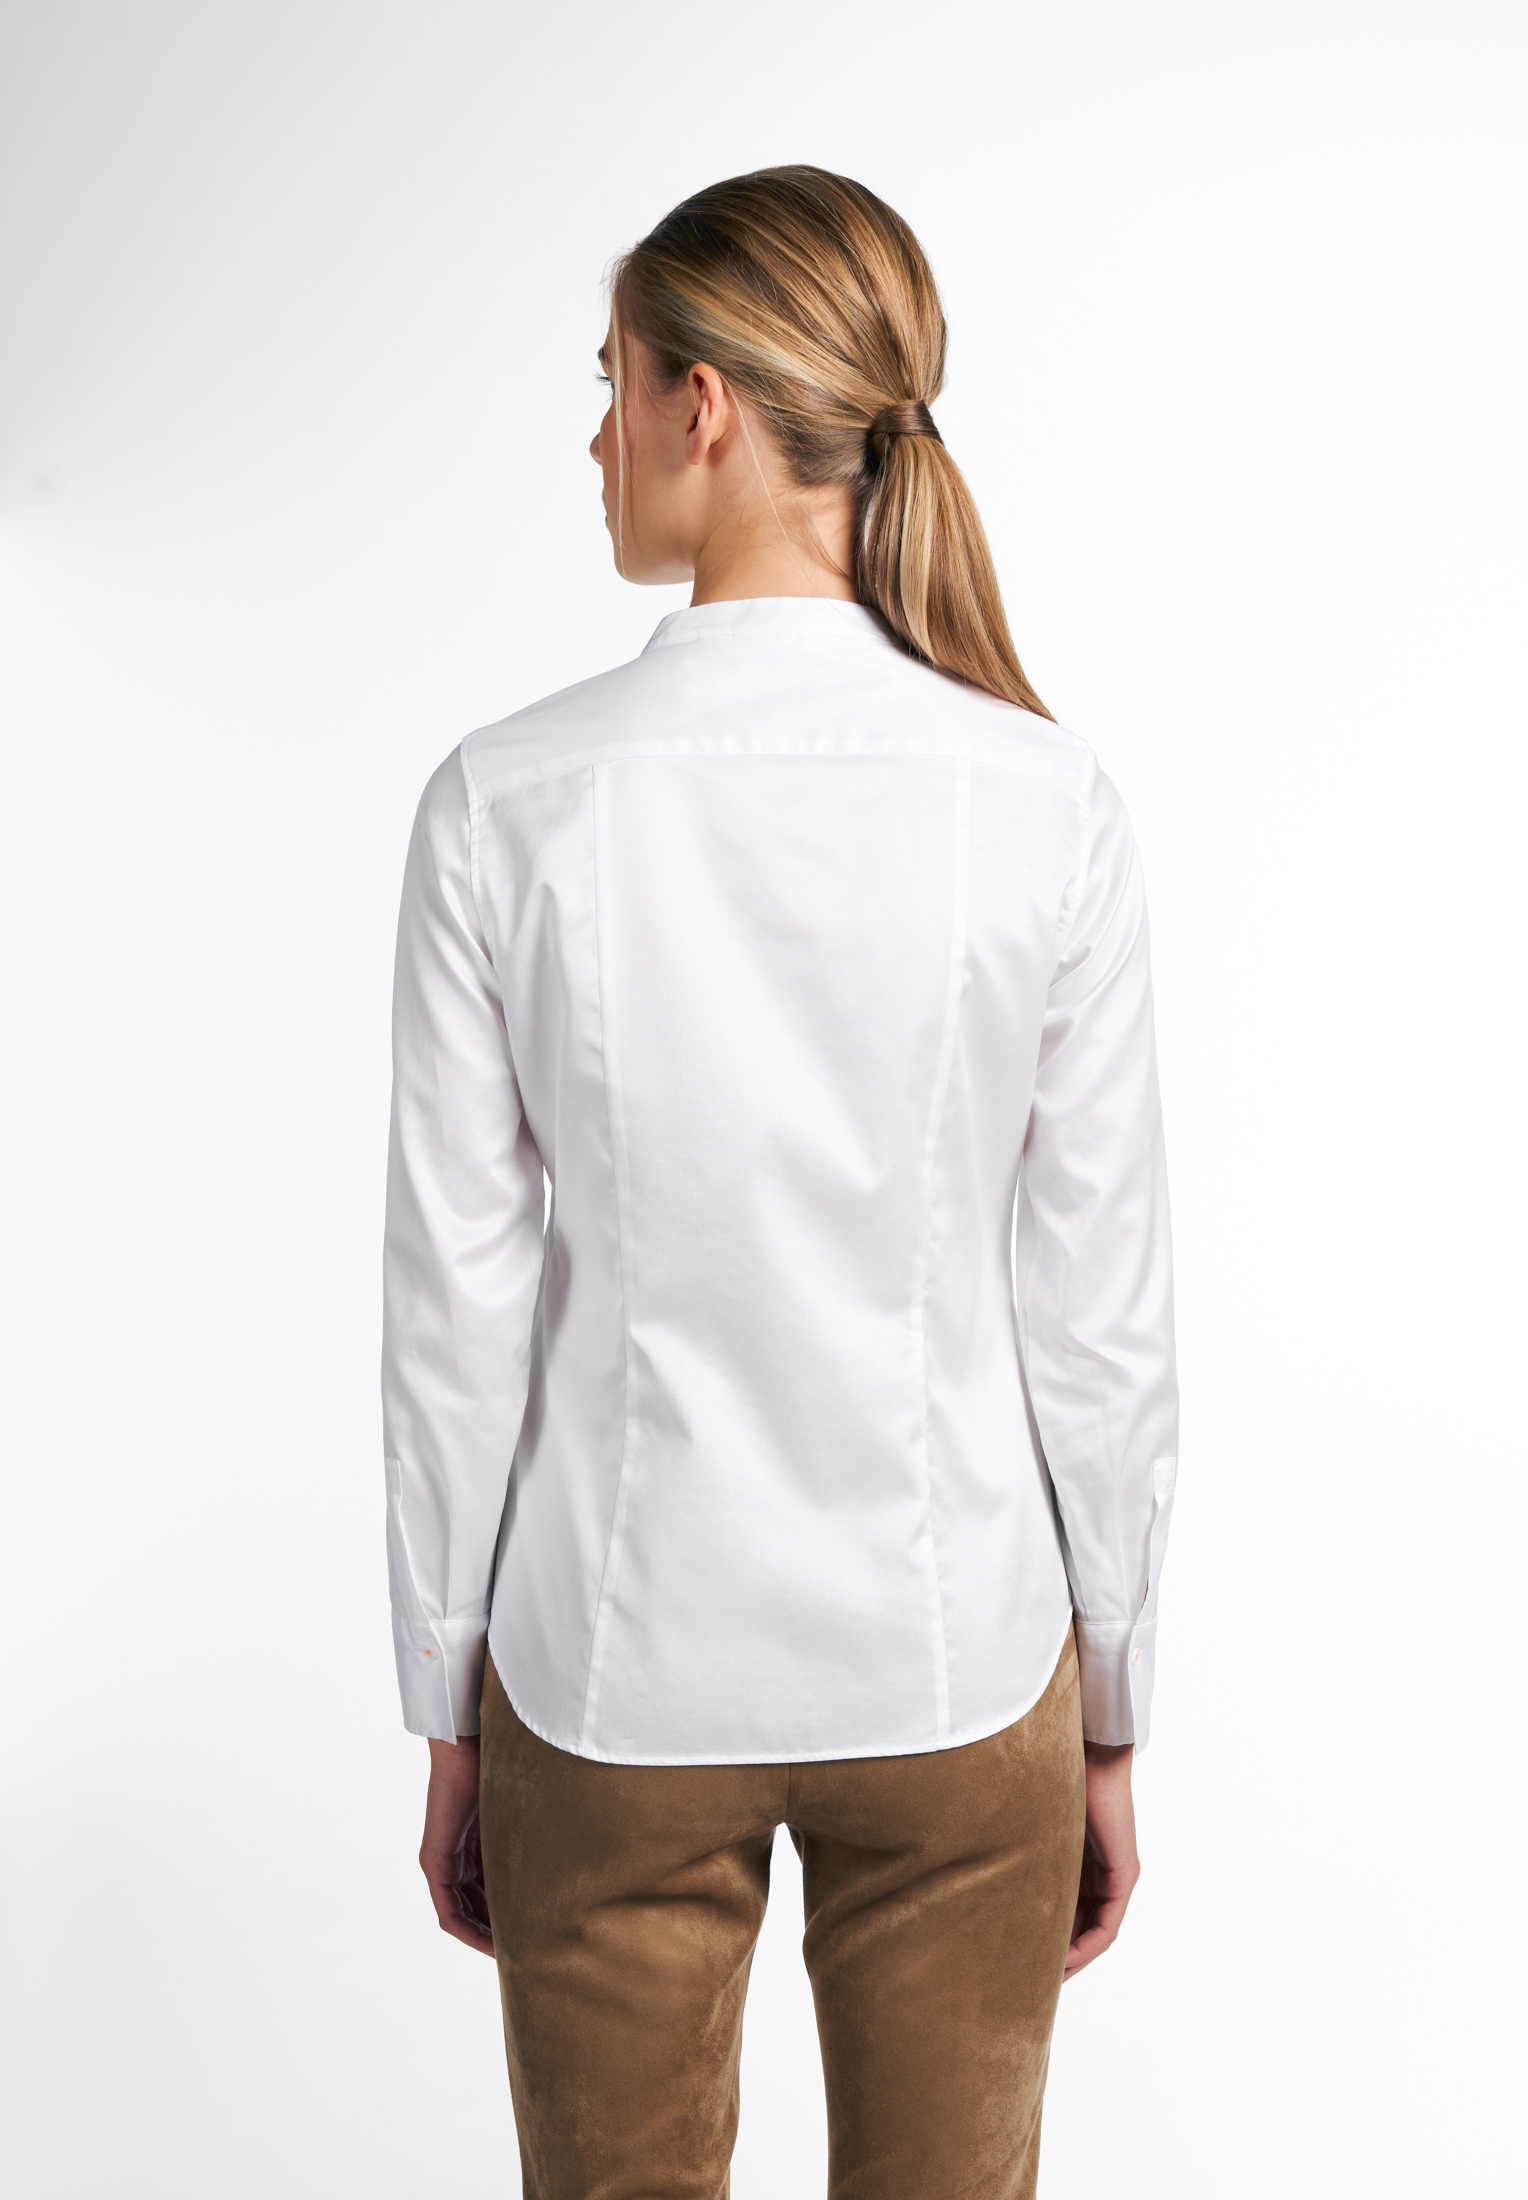 Soft Luxury Shirt Bluse in off-white unifarben | off-white | 38 | Langarm |  2BL03742-00-02-38-1/1